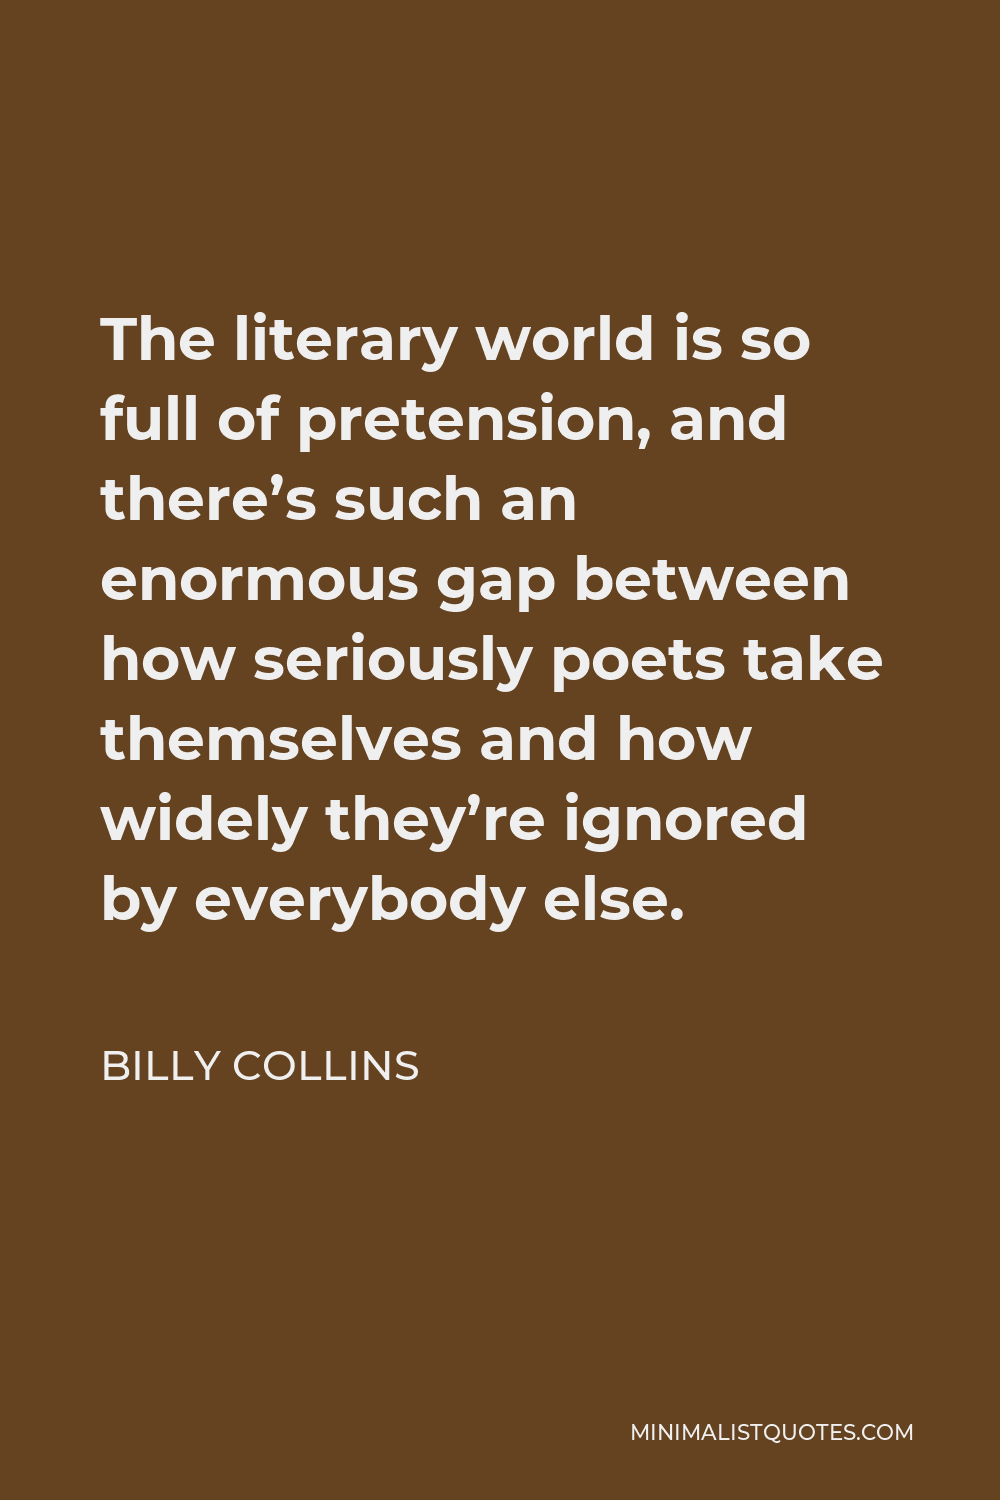 Billy Collins Quote - The literary world is so full of pretension, and there’s such an enormous gap between how seriously poets take themselves and how widely they’re ignored by everybody else.